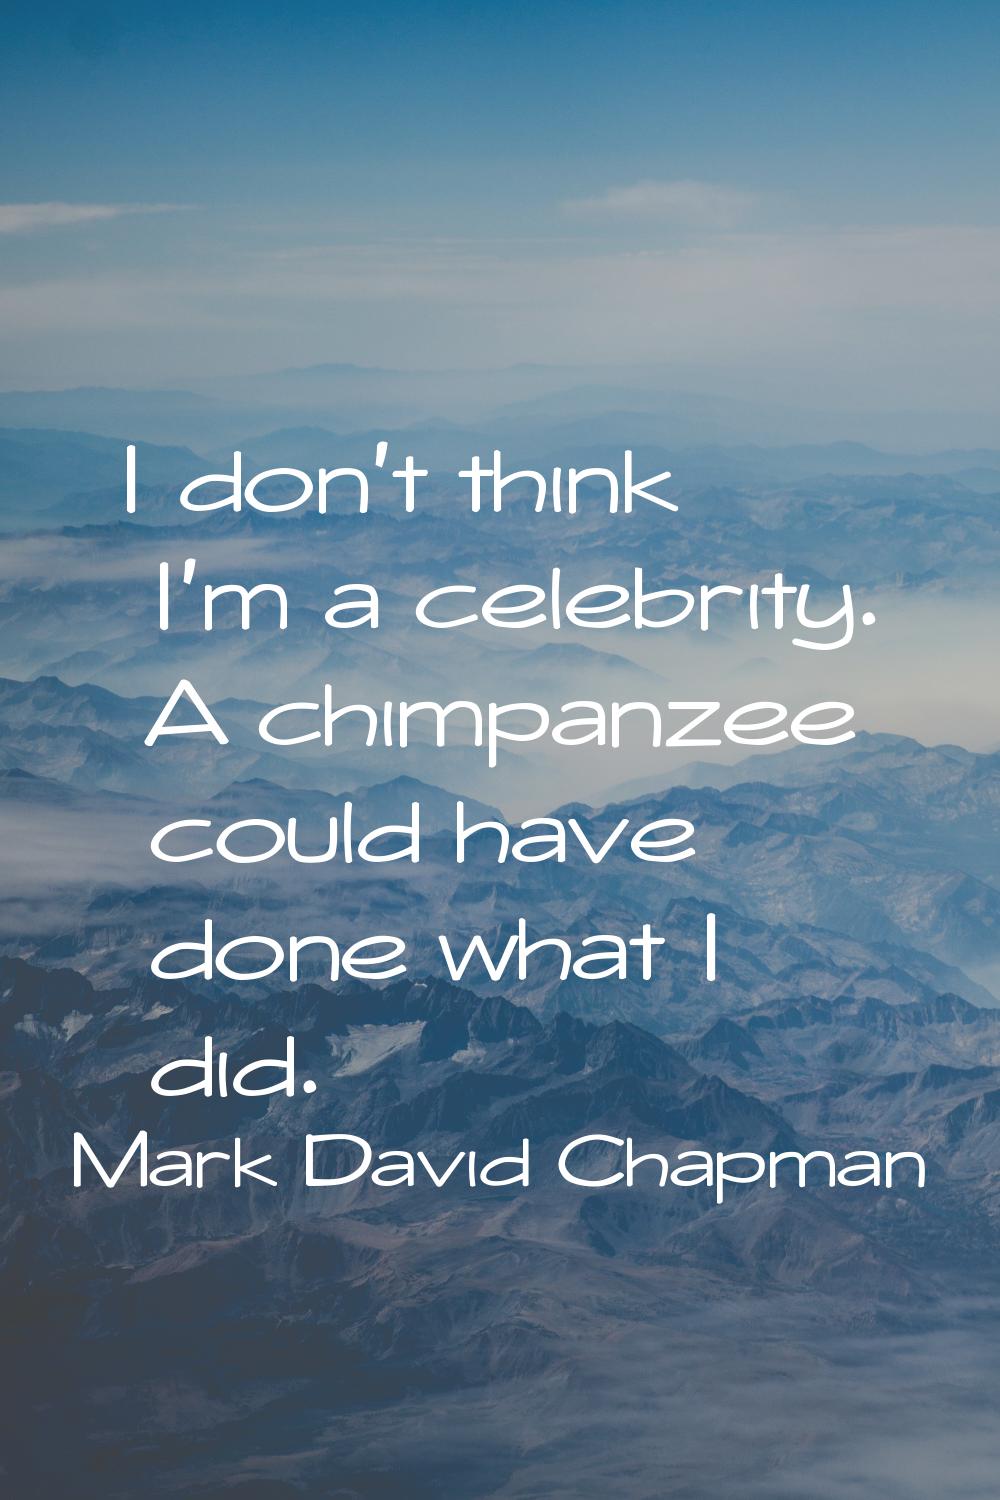 I don't think I'm a celebrity. A chimpanzee could have done what I did.